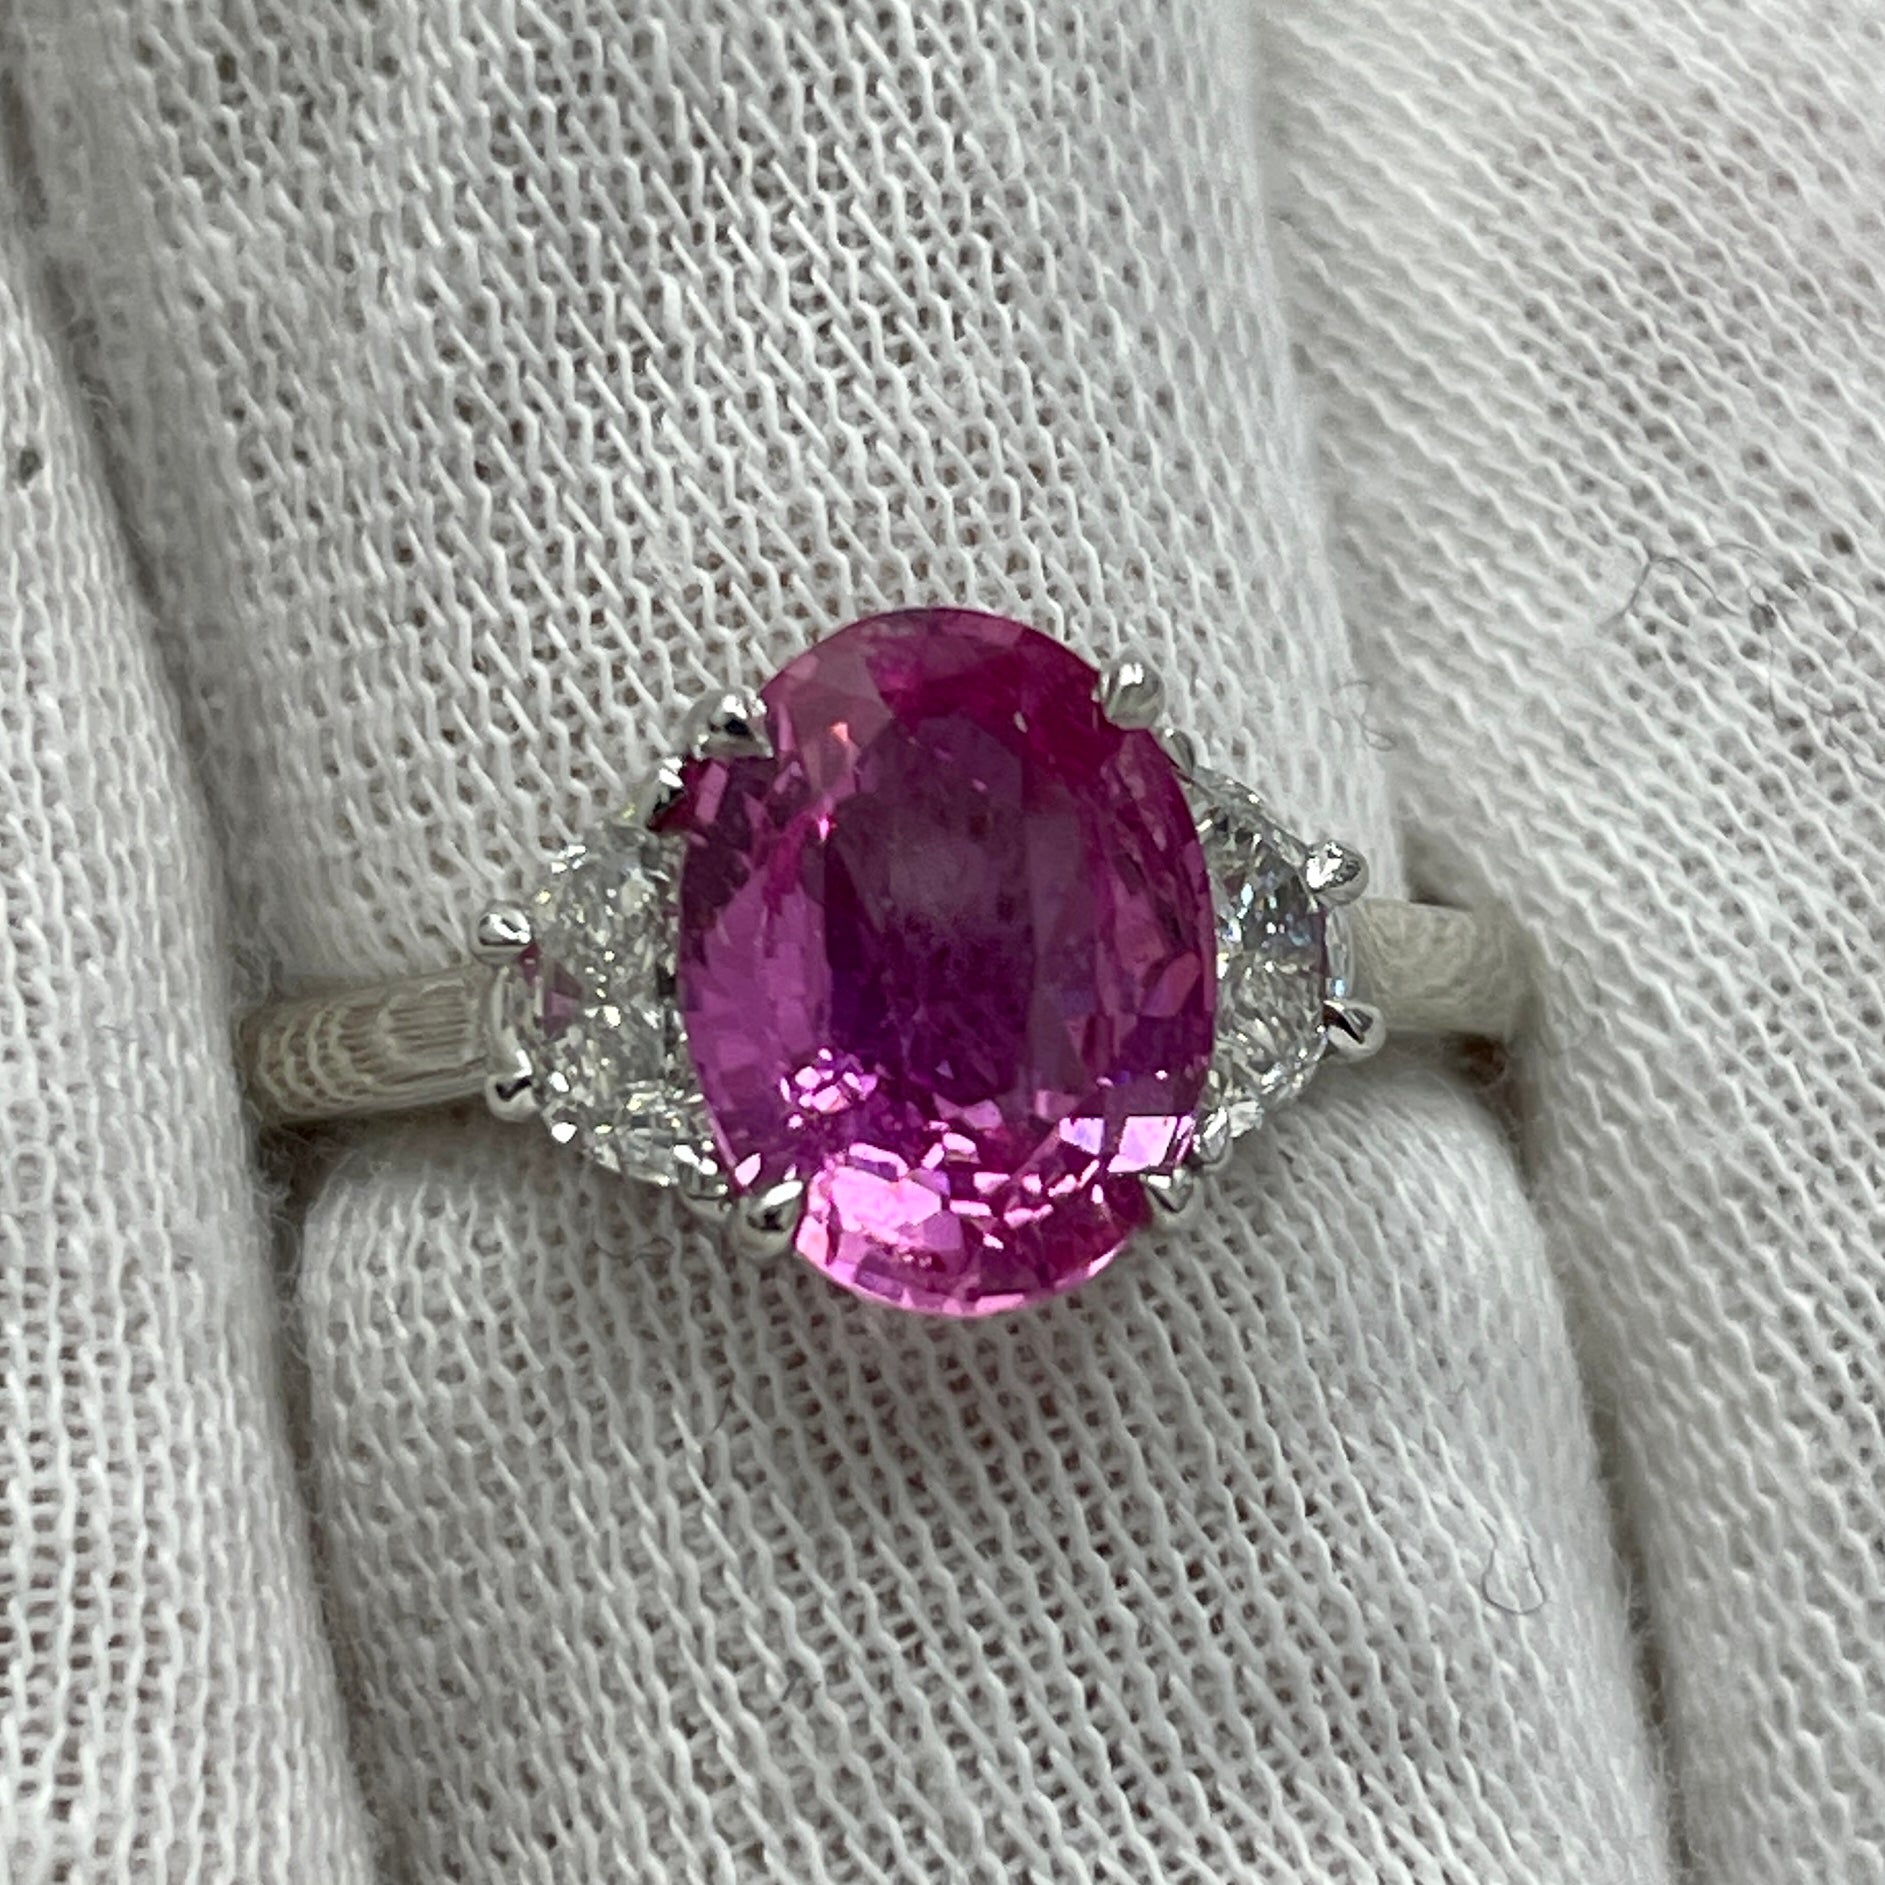 This is a bubble gum pink oval sapphire mounted in a platinum ring with 0.43Ct of brilliant white half-moon diamonds. Suitable for any occasion!